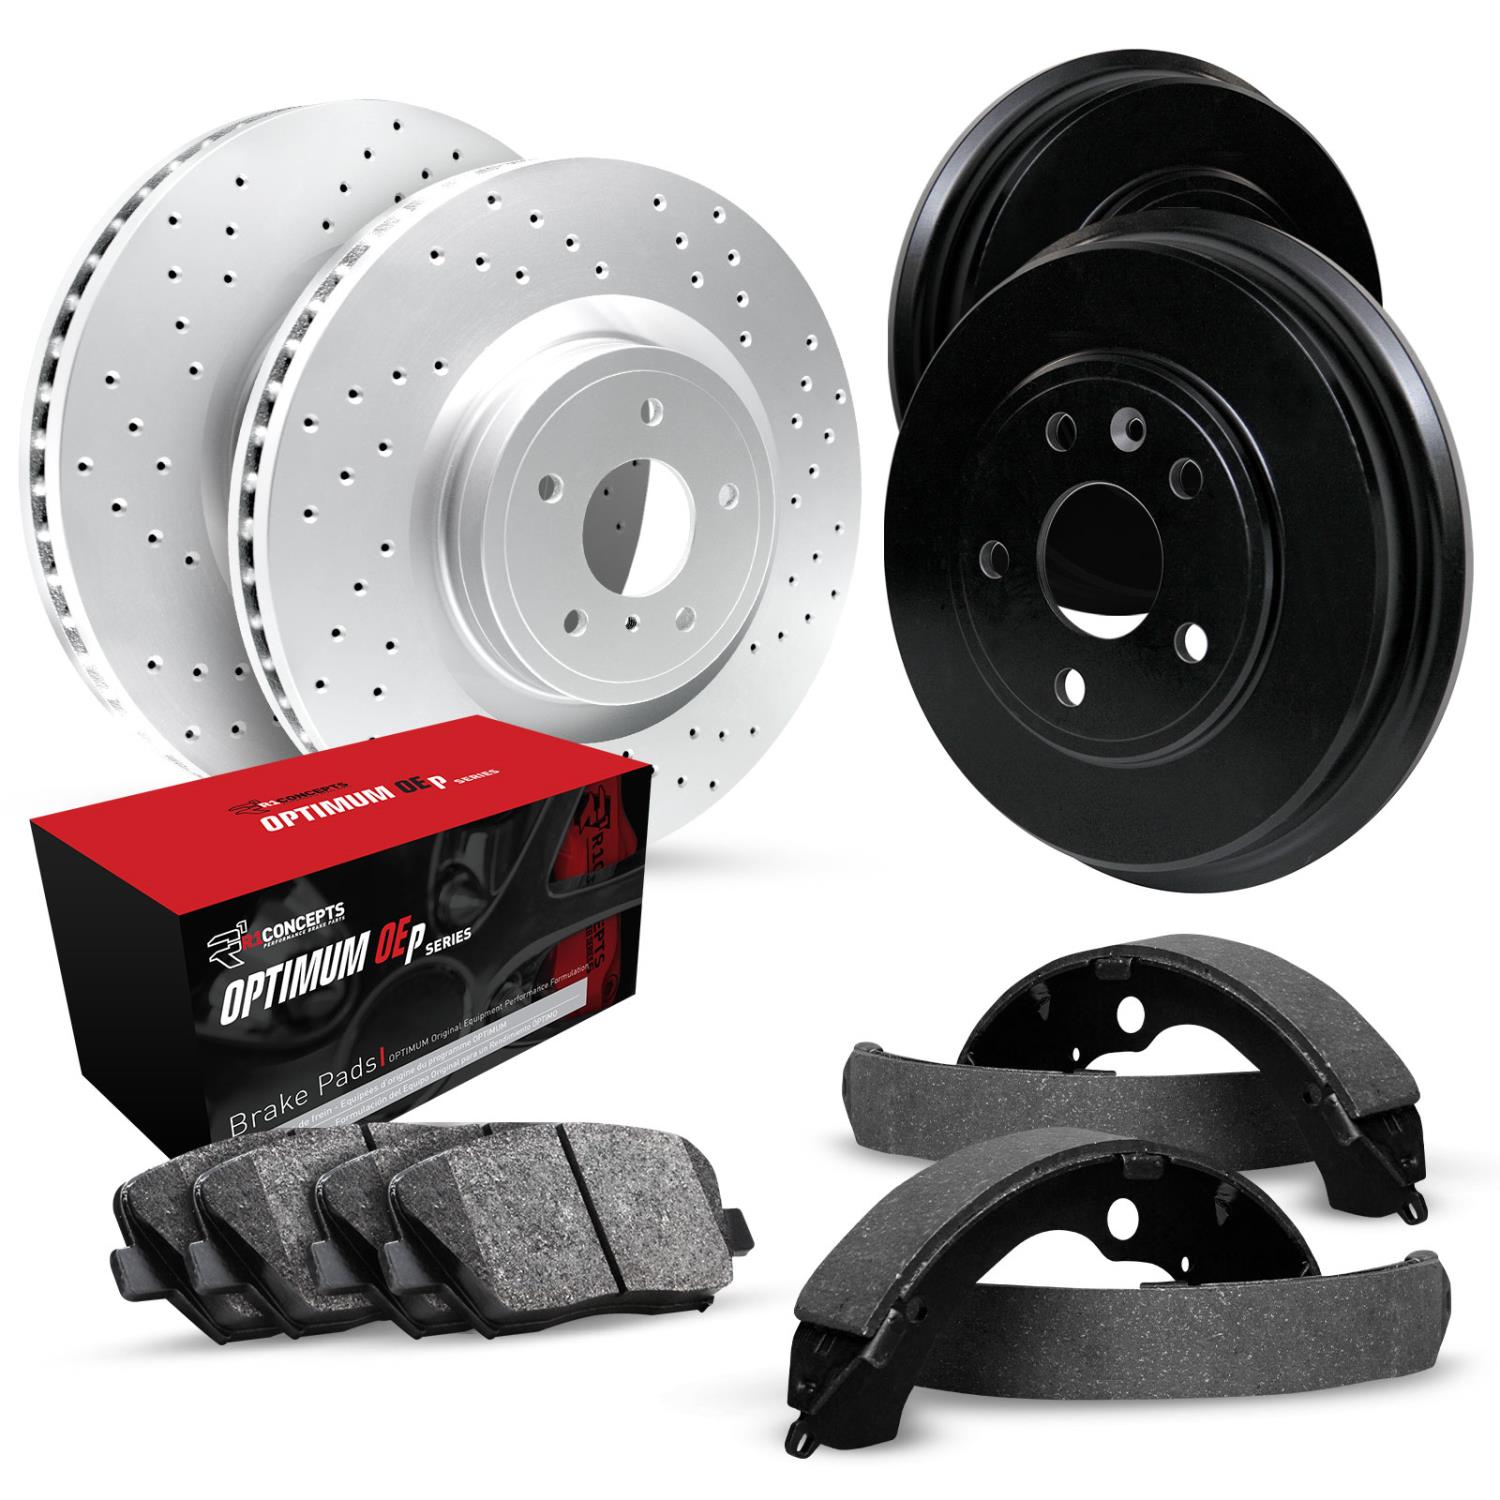 GEO-Carbon Drilled Brake Rotor & Drum Set w/Optimum OE Pads & Shoes, 1998-2000 GM, Position: Front & Rear